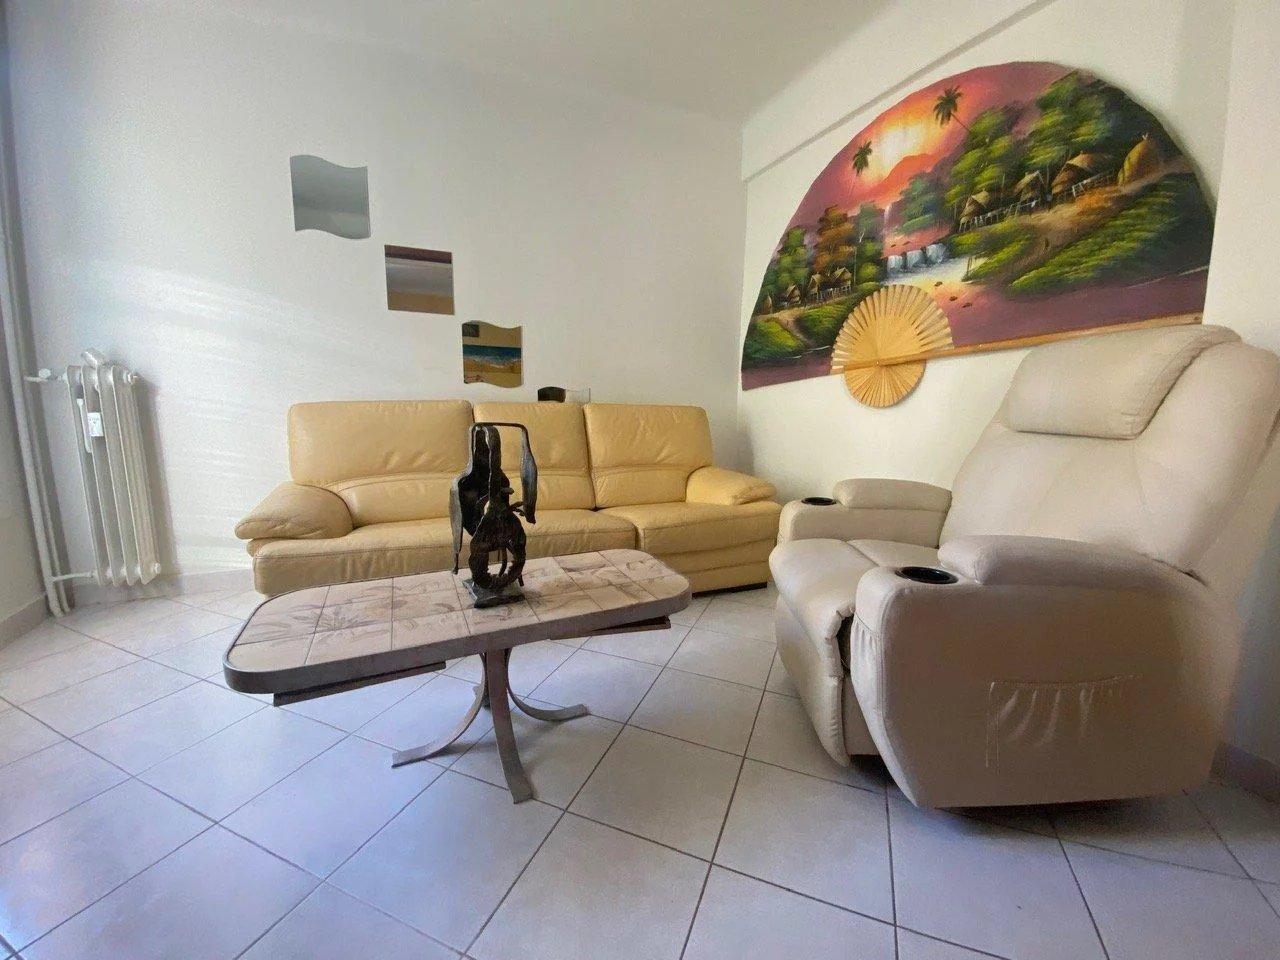 Appartement  4 Rooms 65m2  for sale   275 000 €